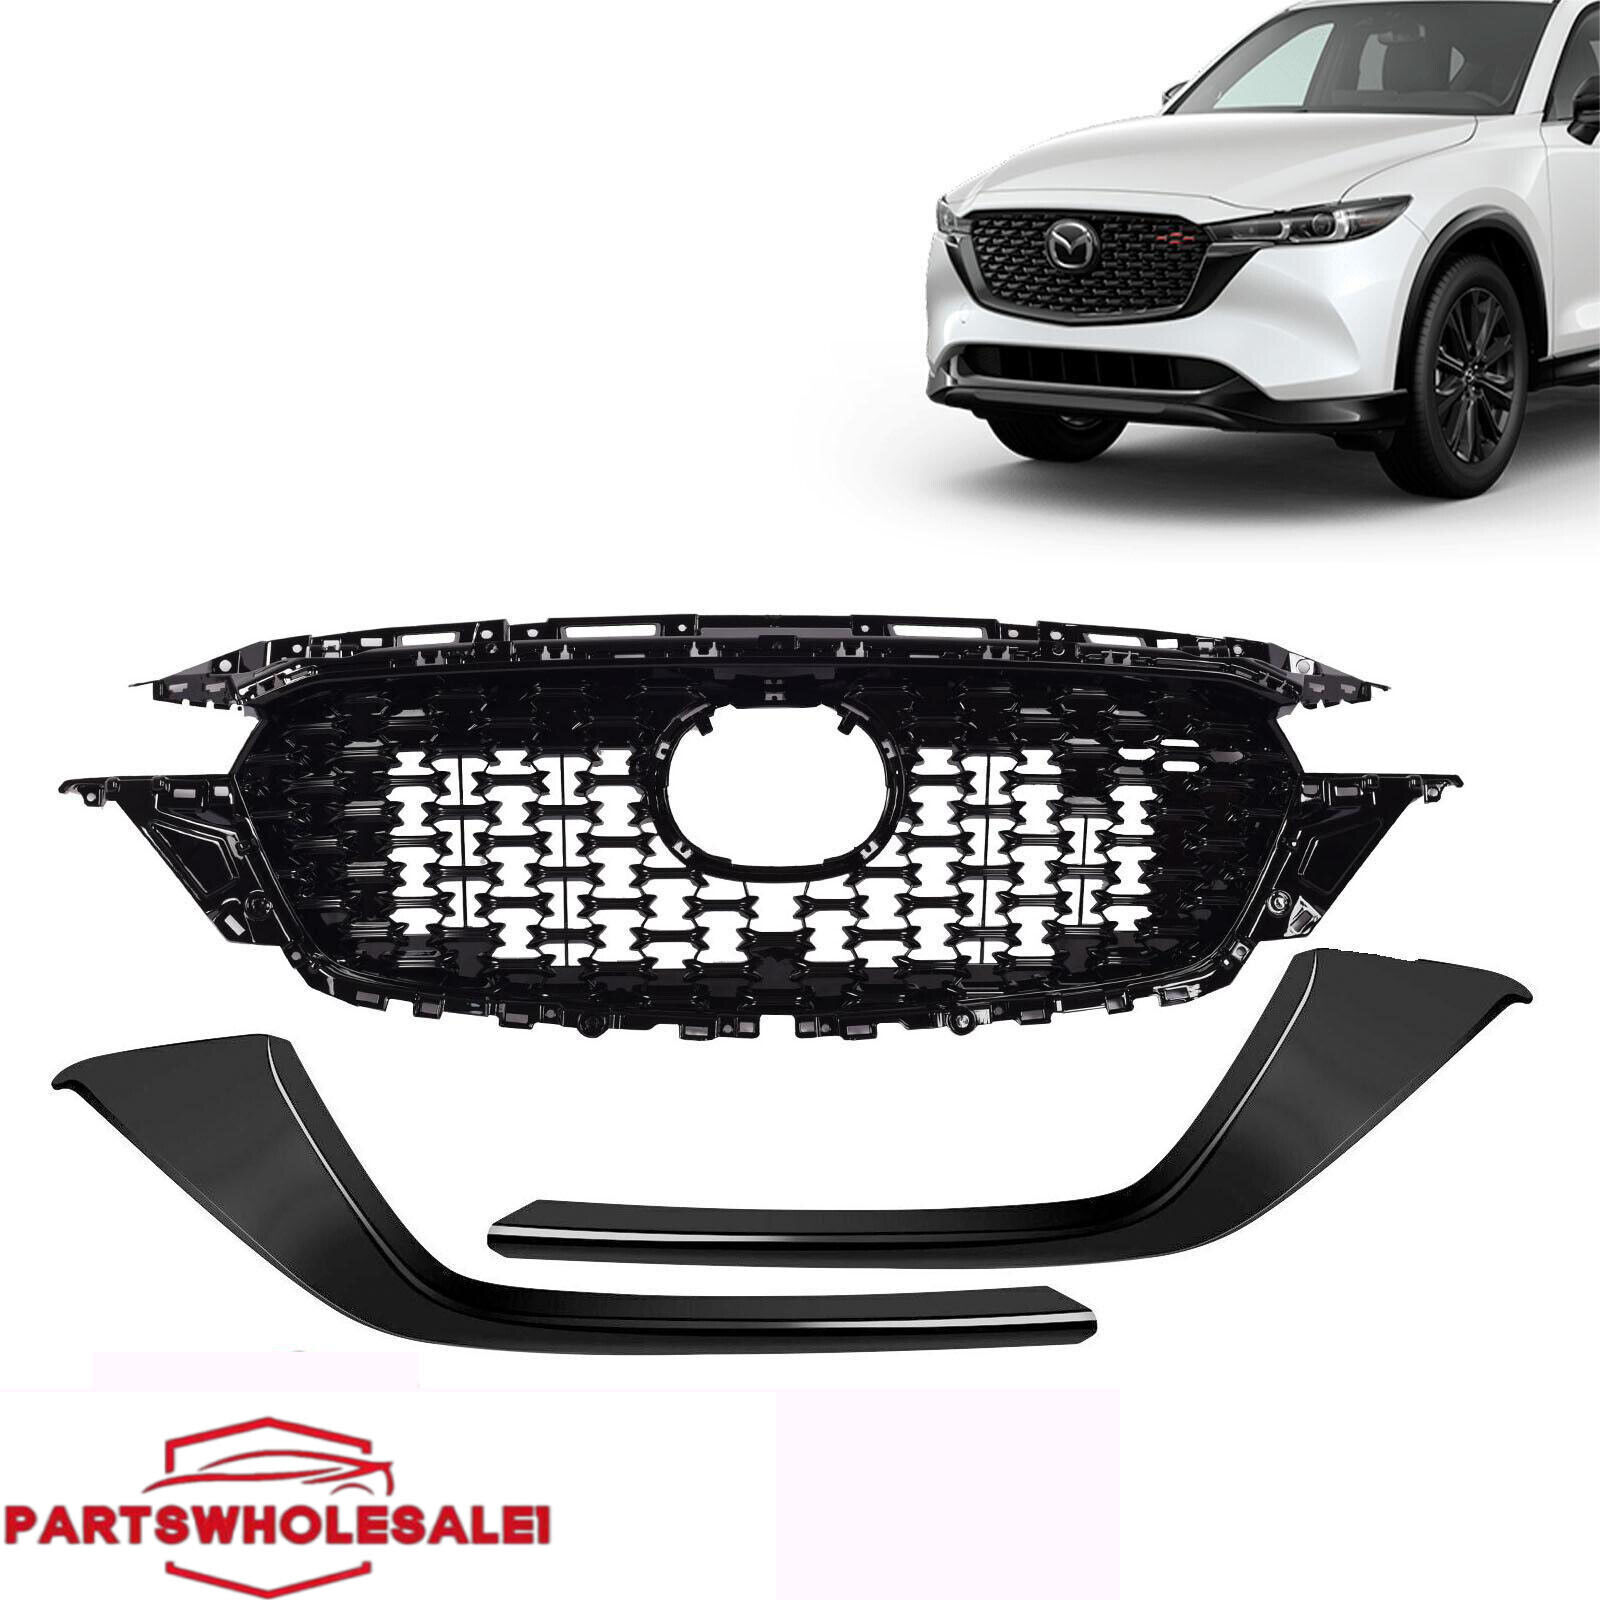 Fits 2022-2023 Mazda CX5 CX-5 Front Grille/Front Grille Molding Trim Gloss Black